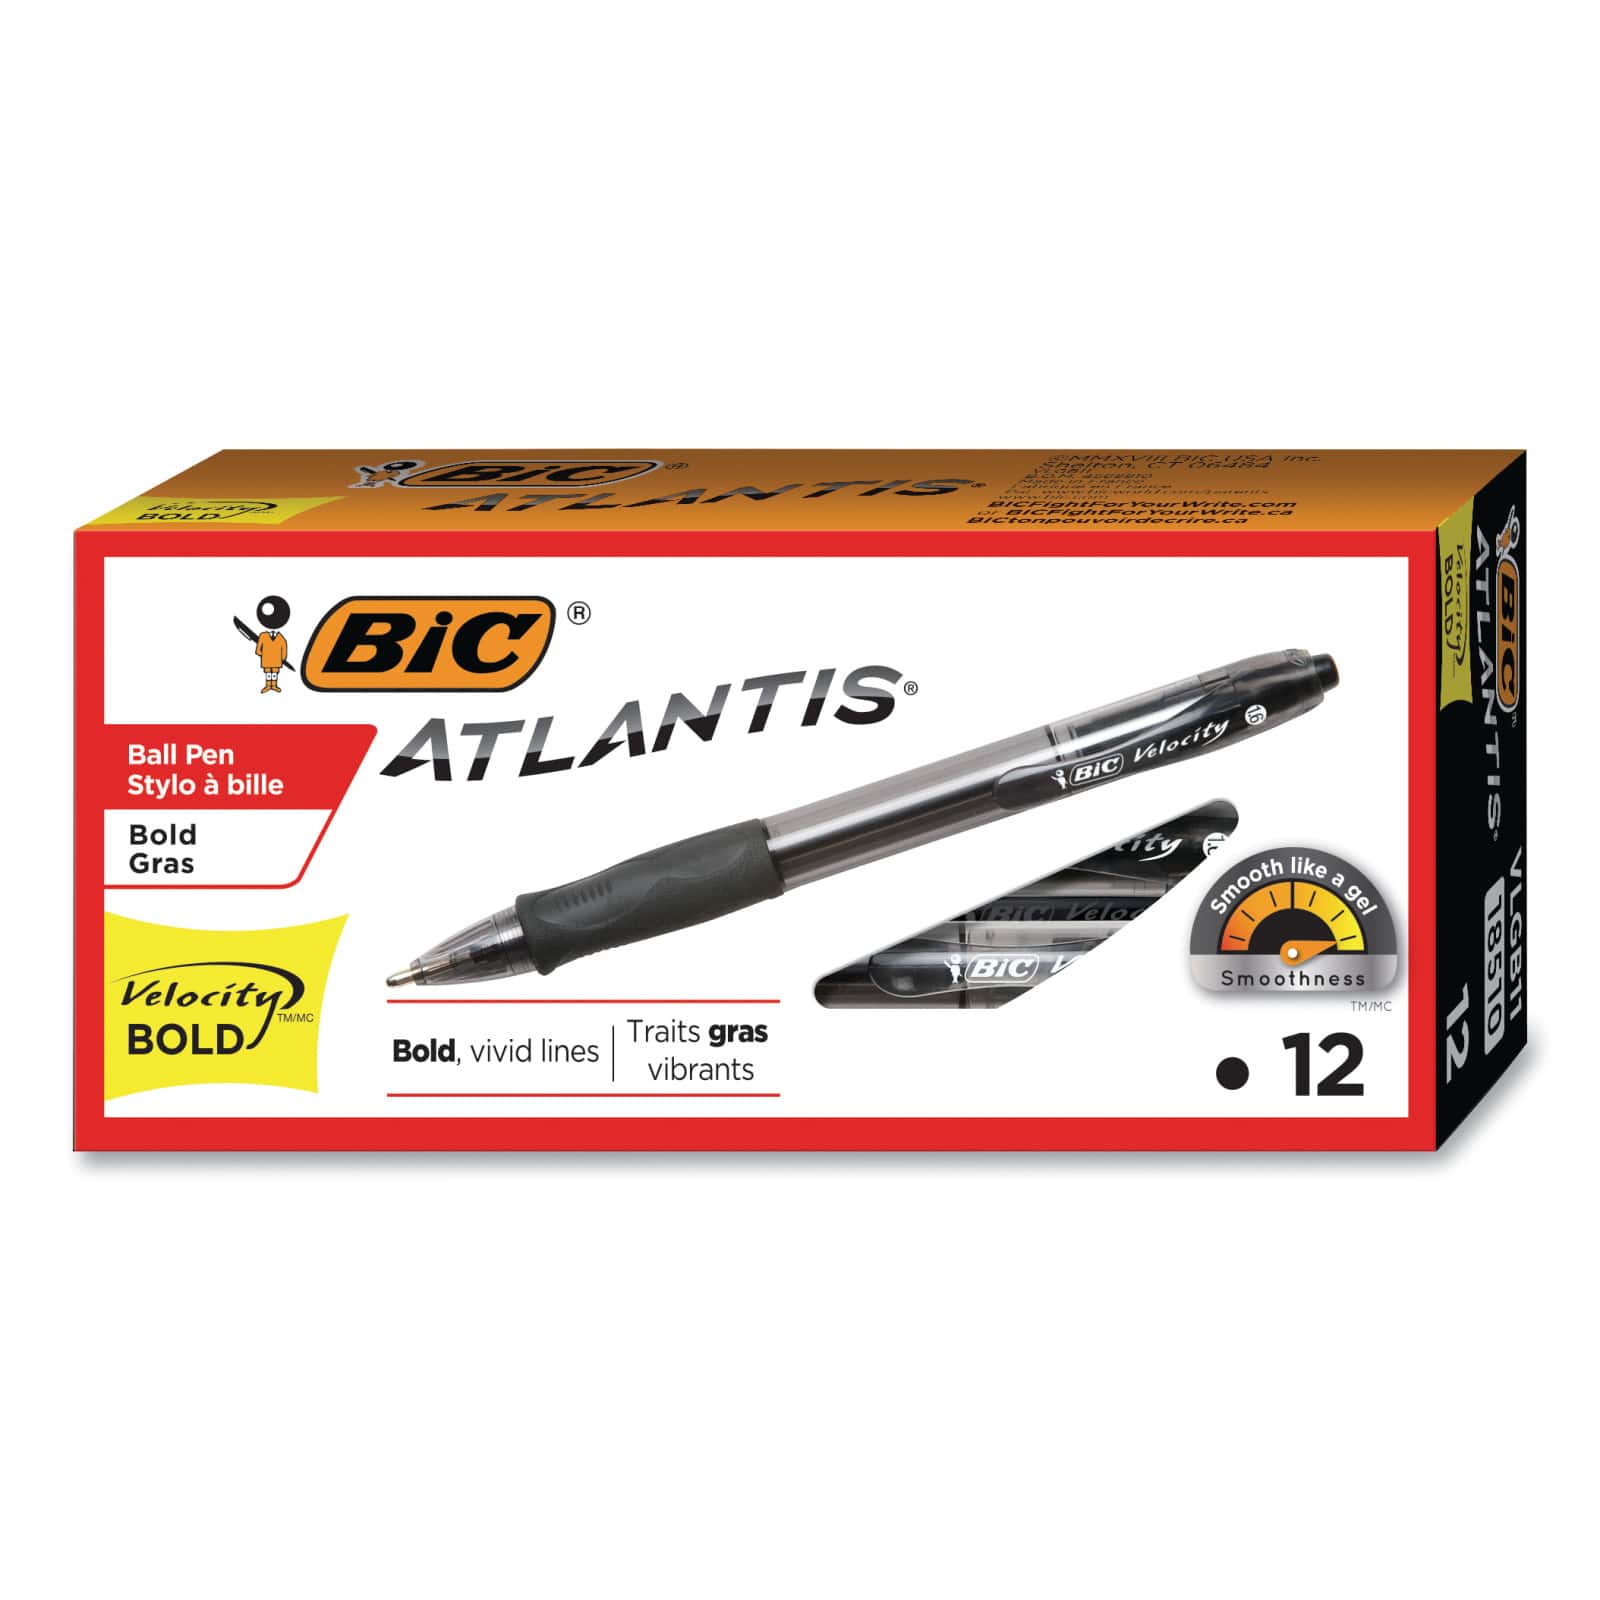 1.6mm Black New BIC Atlantis Velocity Bold Retractable Ball Pen For a Super-Smooth Writing Experience Bold Point 12-Count 